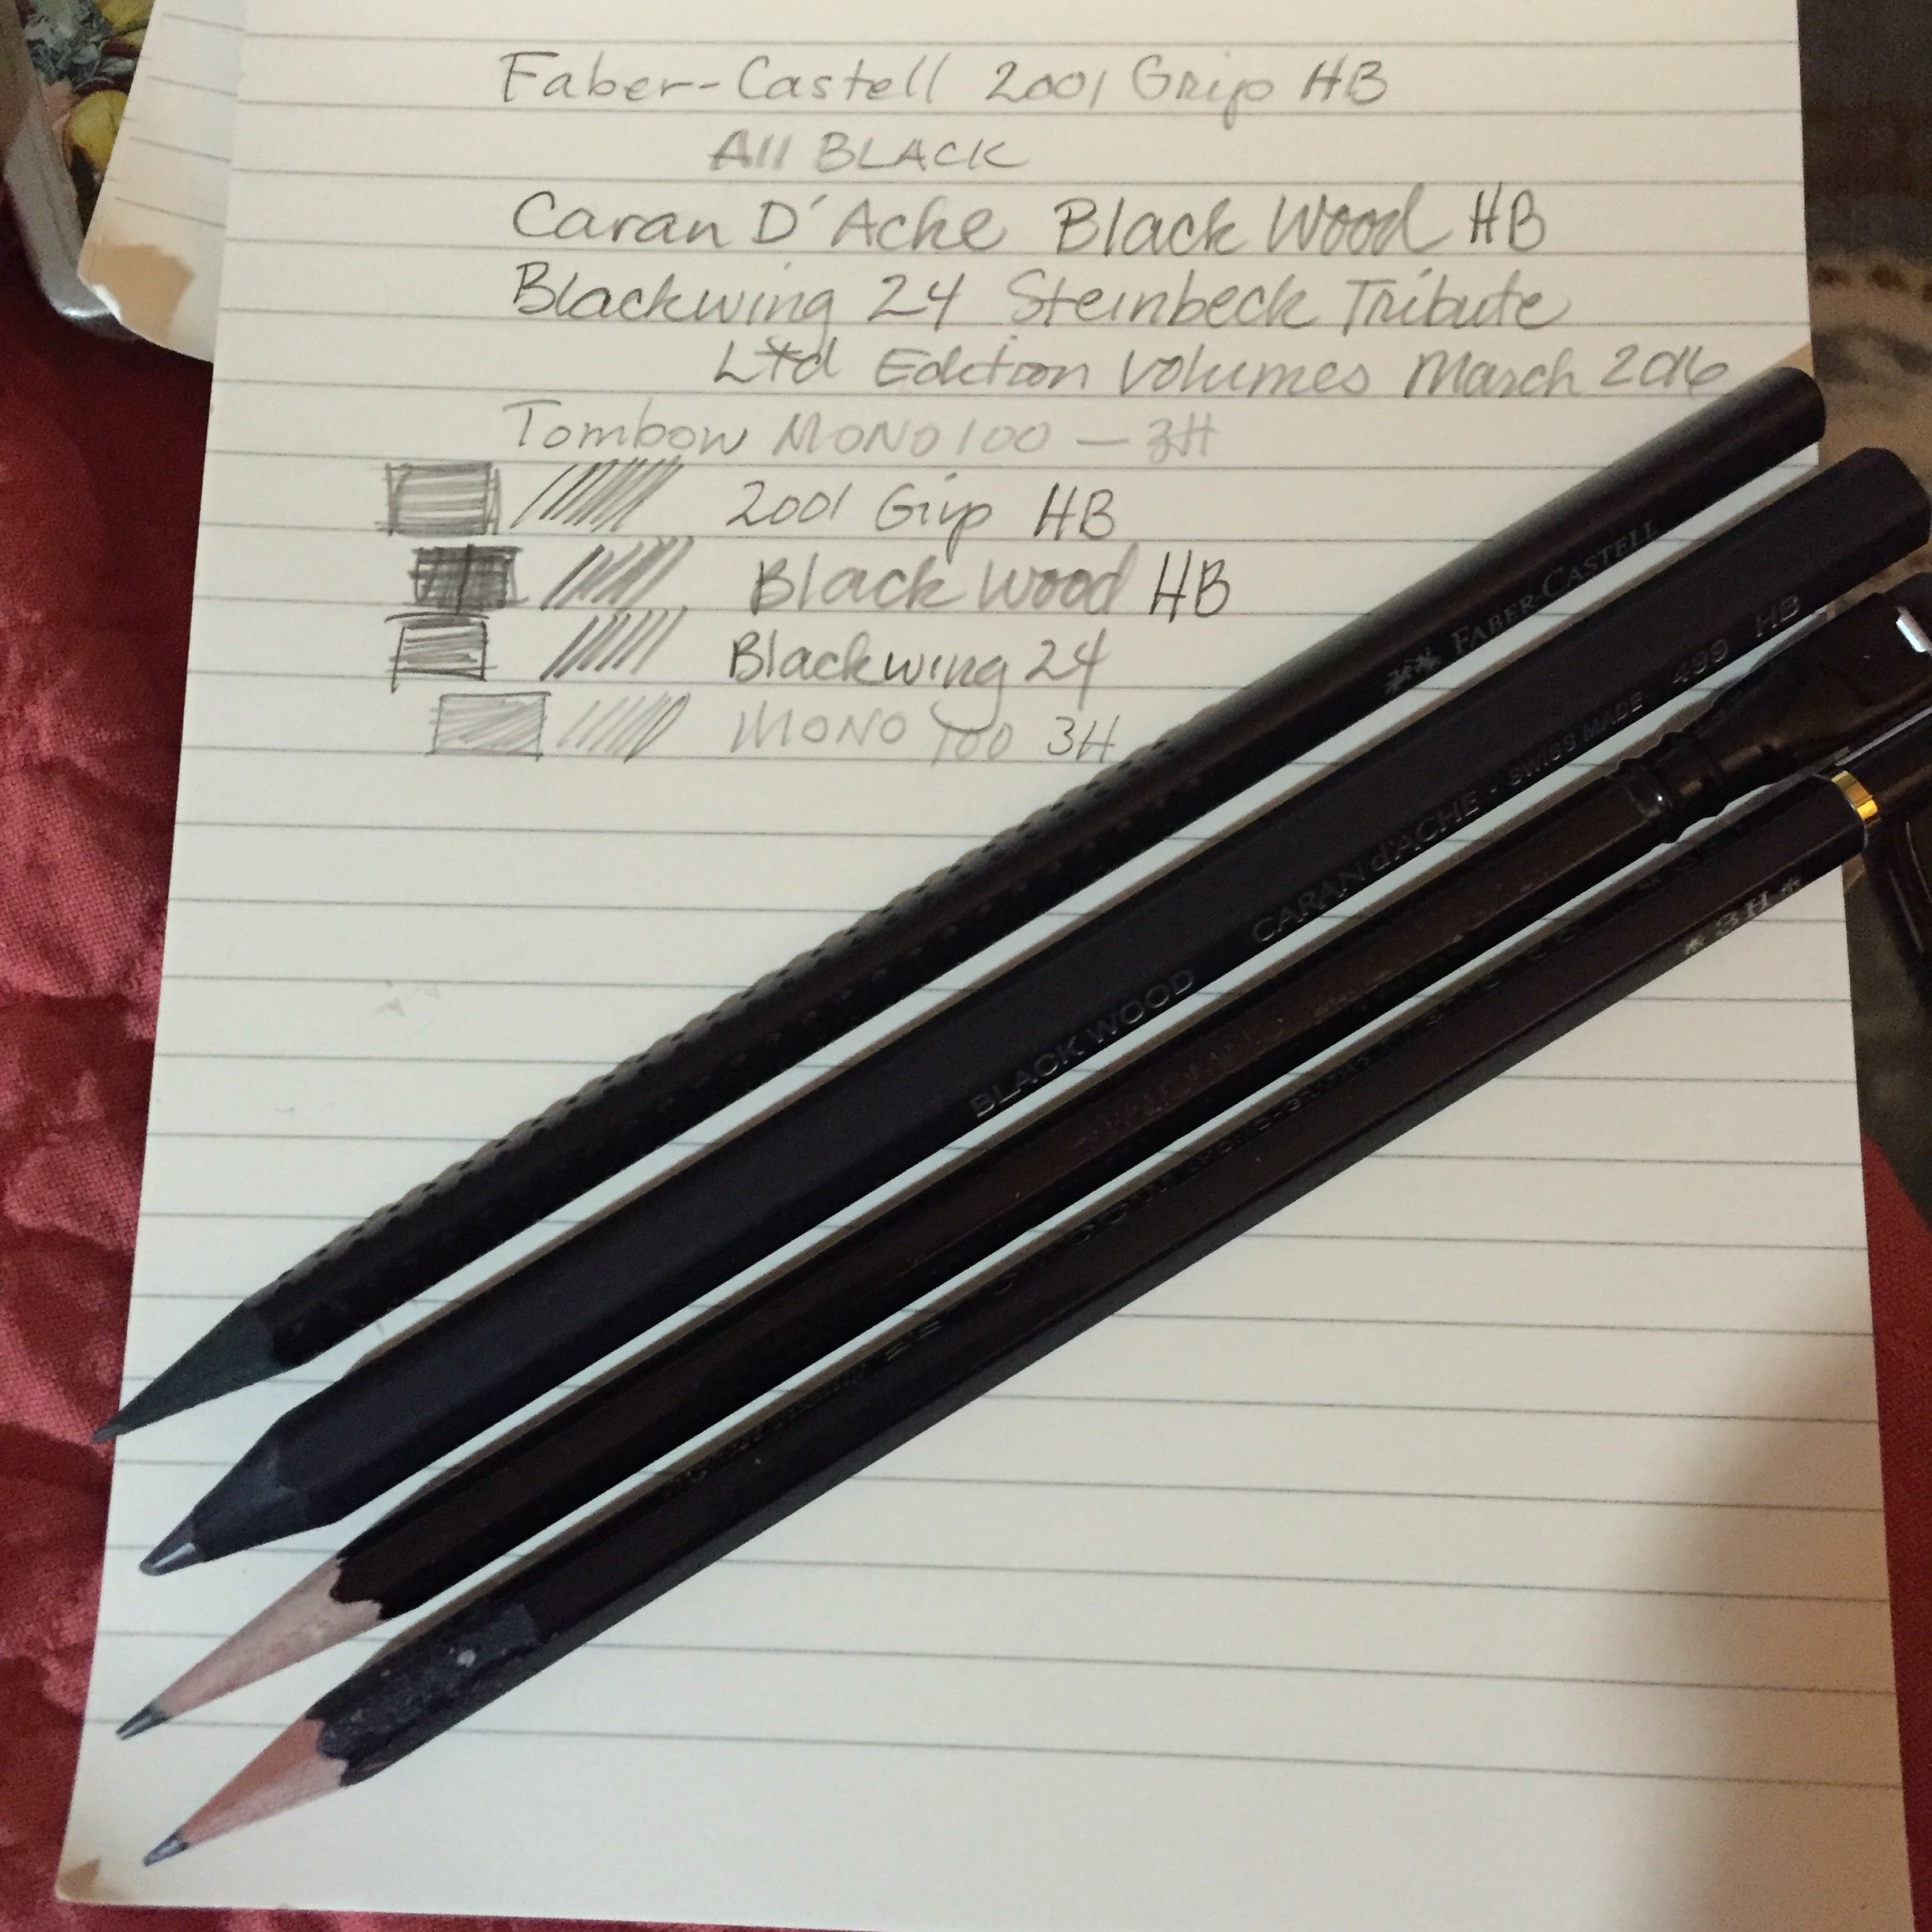 4 black pencils and example of how they perform